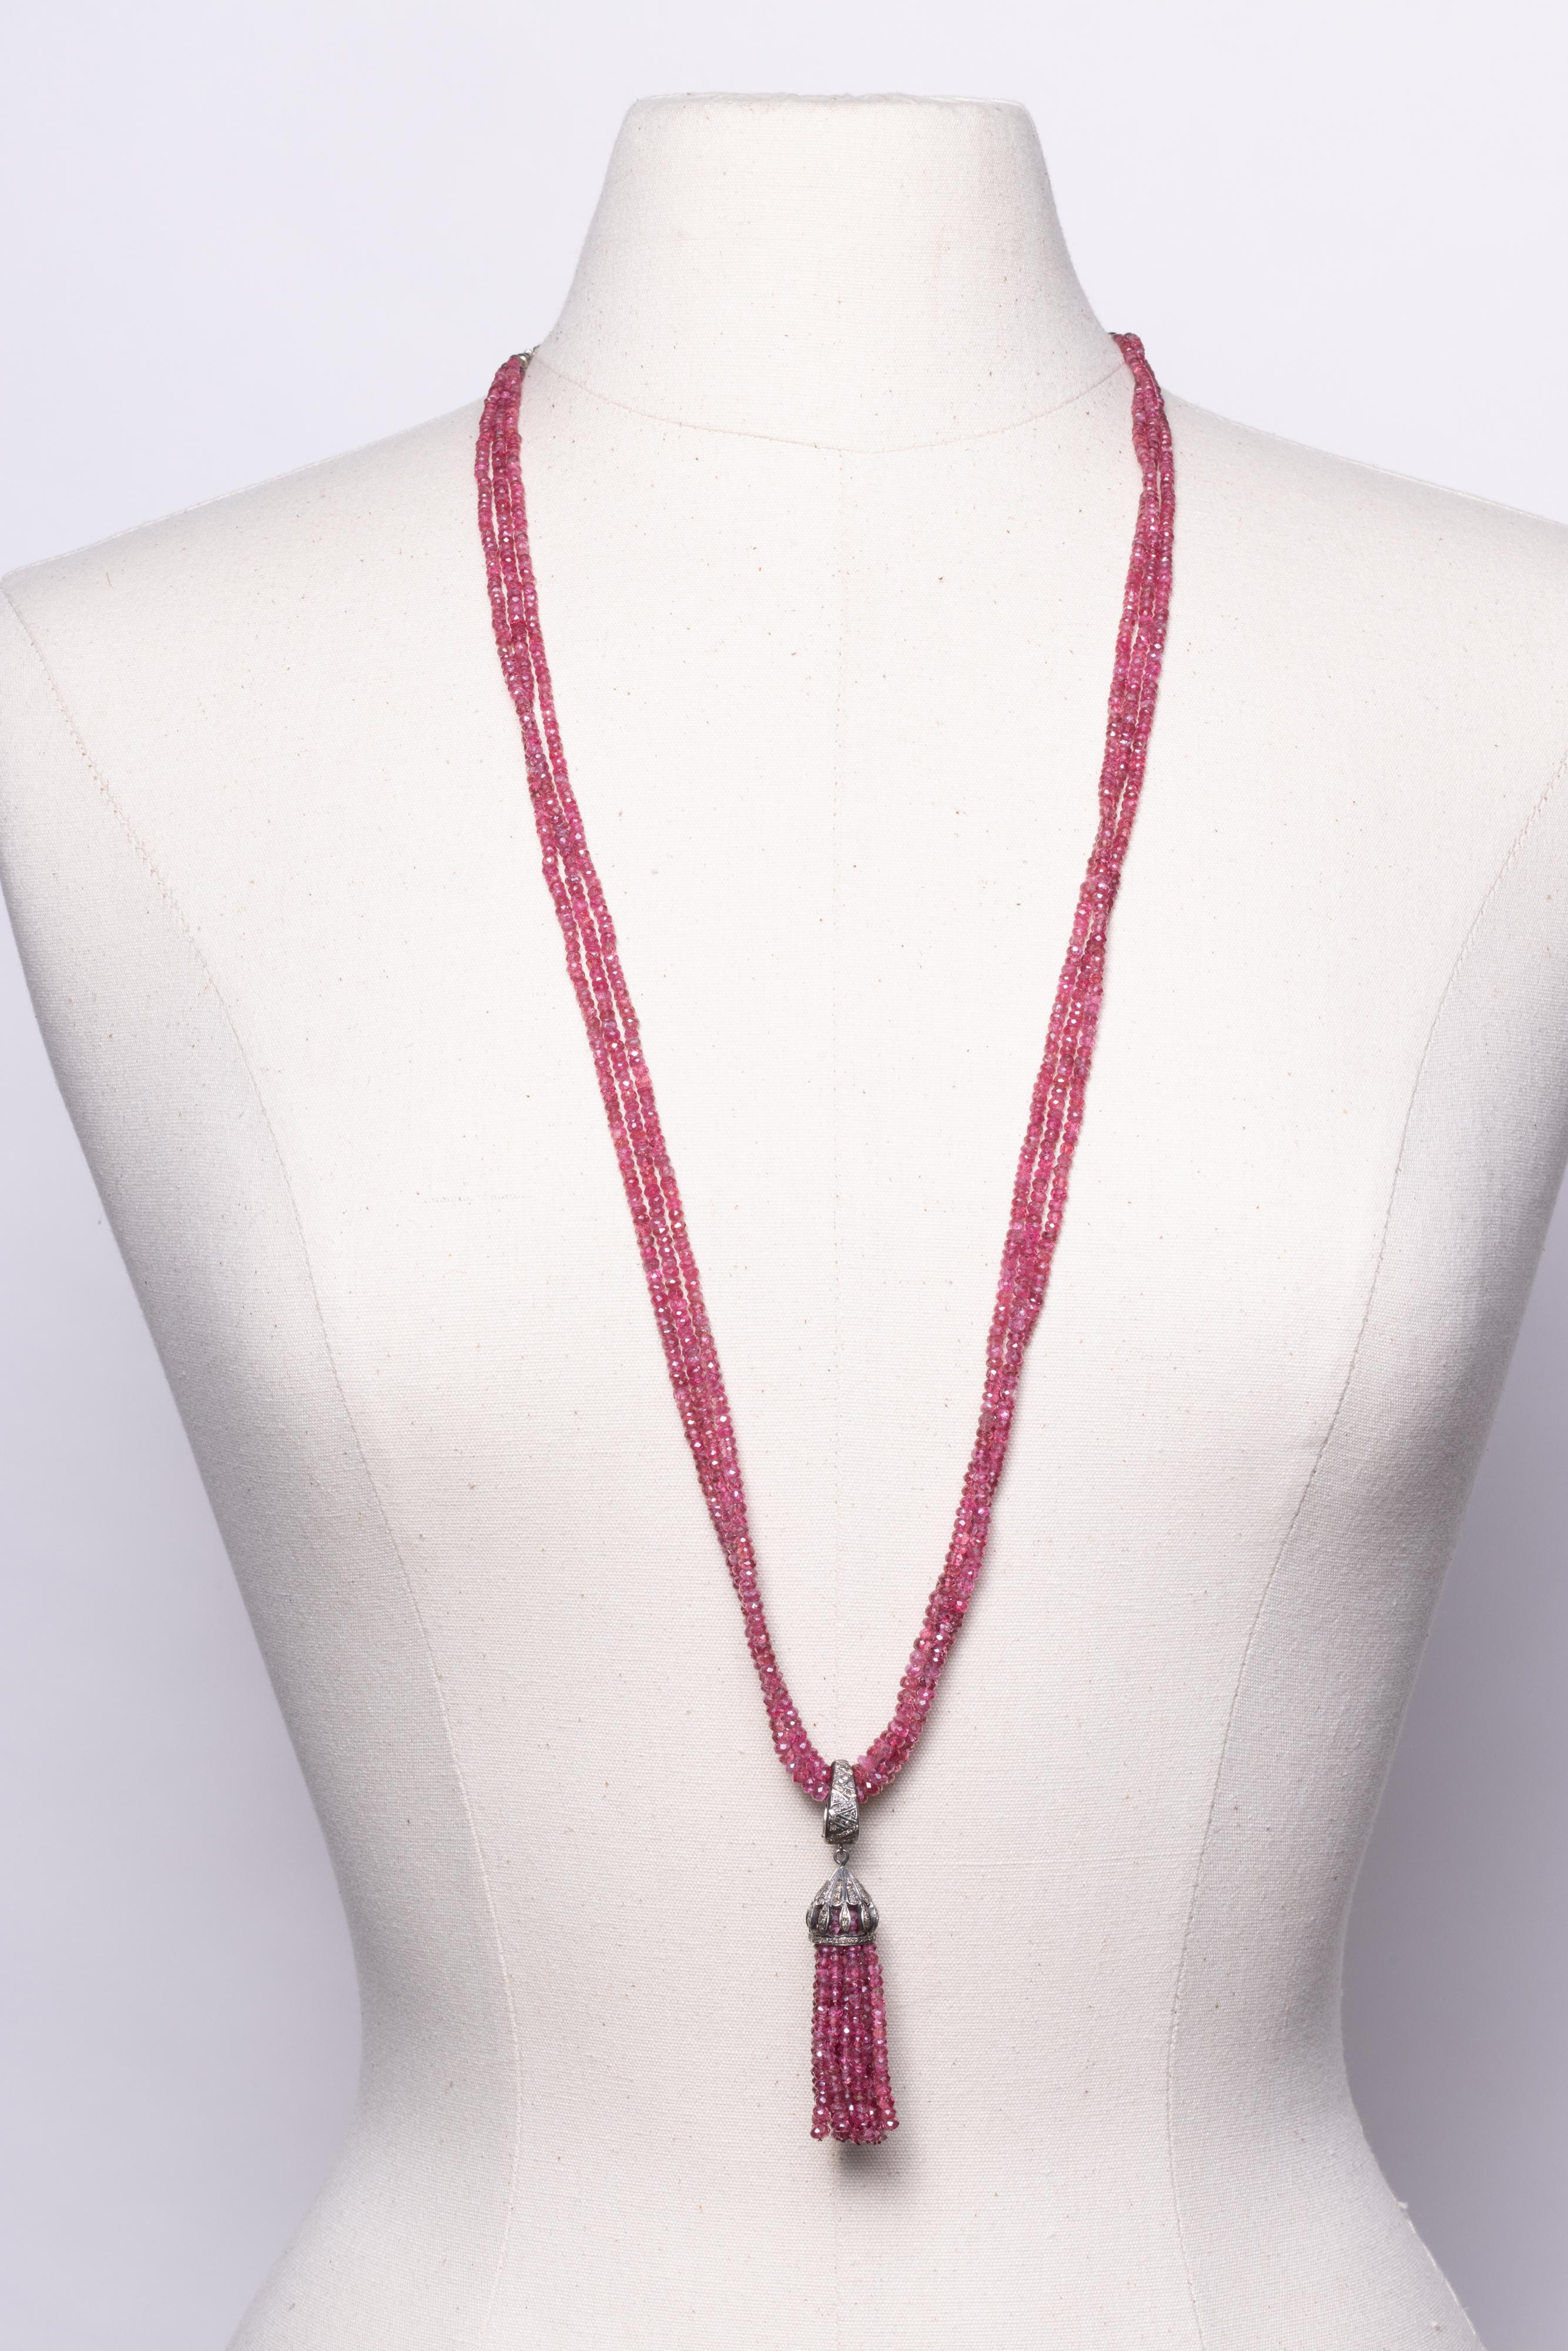 Multi-Strand Faceted Burmese Pink Ruby and Pave` Diamond Beaded Necklace In Excellent Condition For Sale In Nantucket, MA